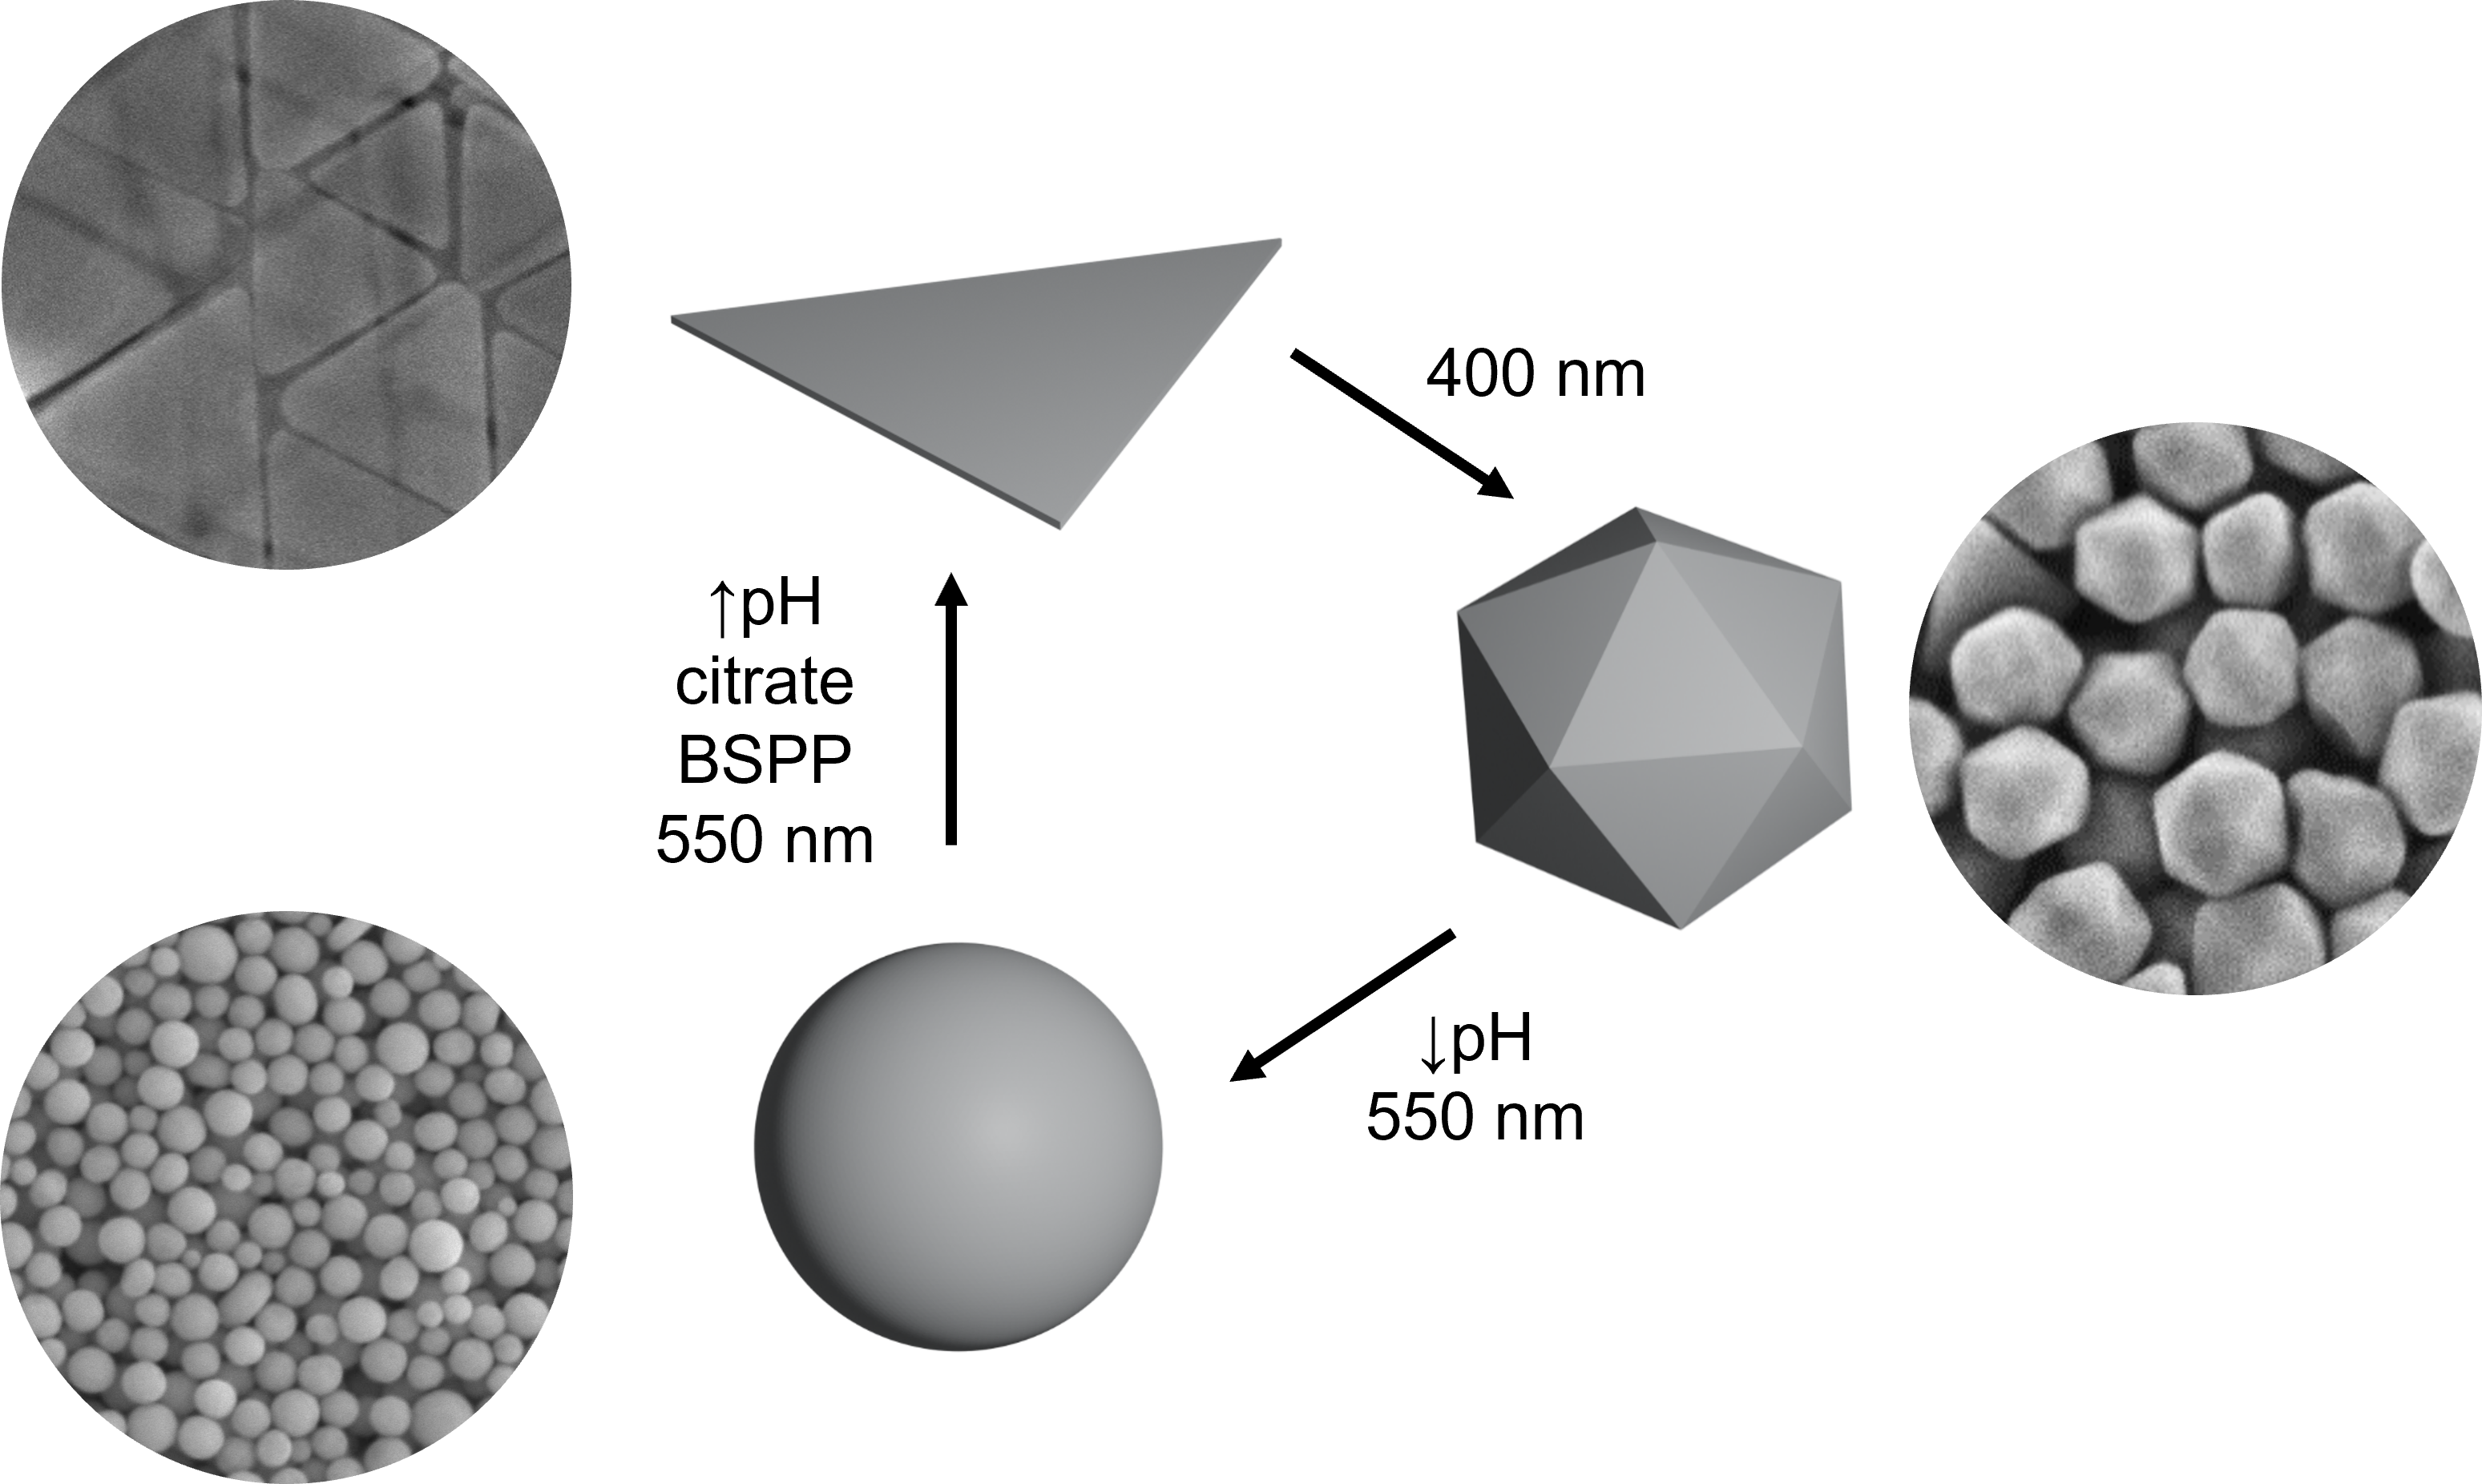 Table of contents graphic showing reconfiguration of silver prisms to icosahedra to spheres and back to prisms